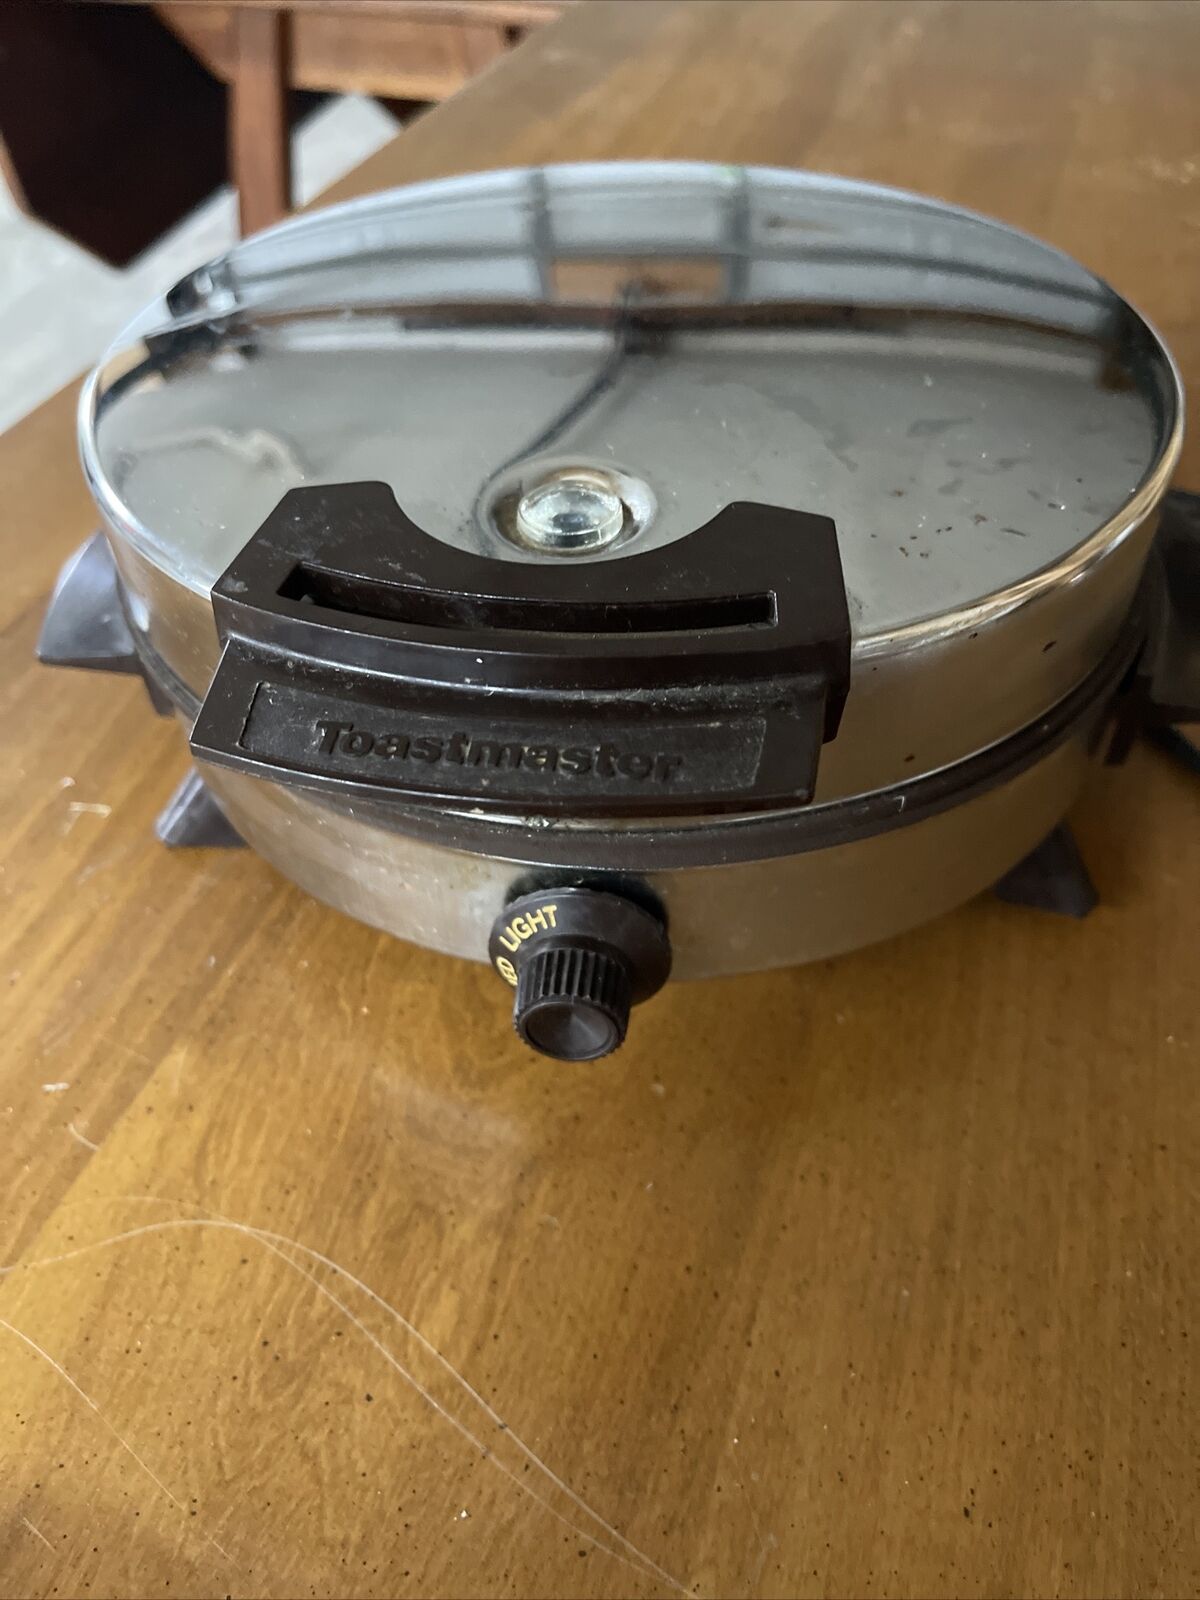 Vintage 1970s Toastmaster Waffle Iron Maker Model W252A Chrome Silver Nonstick